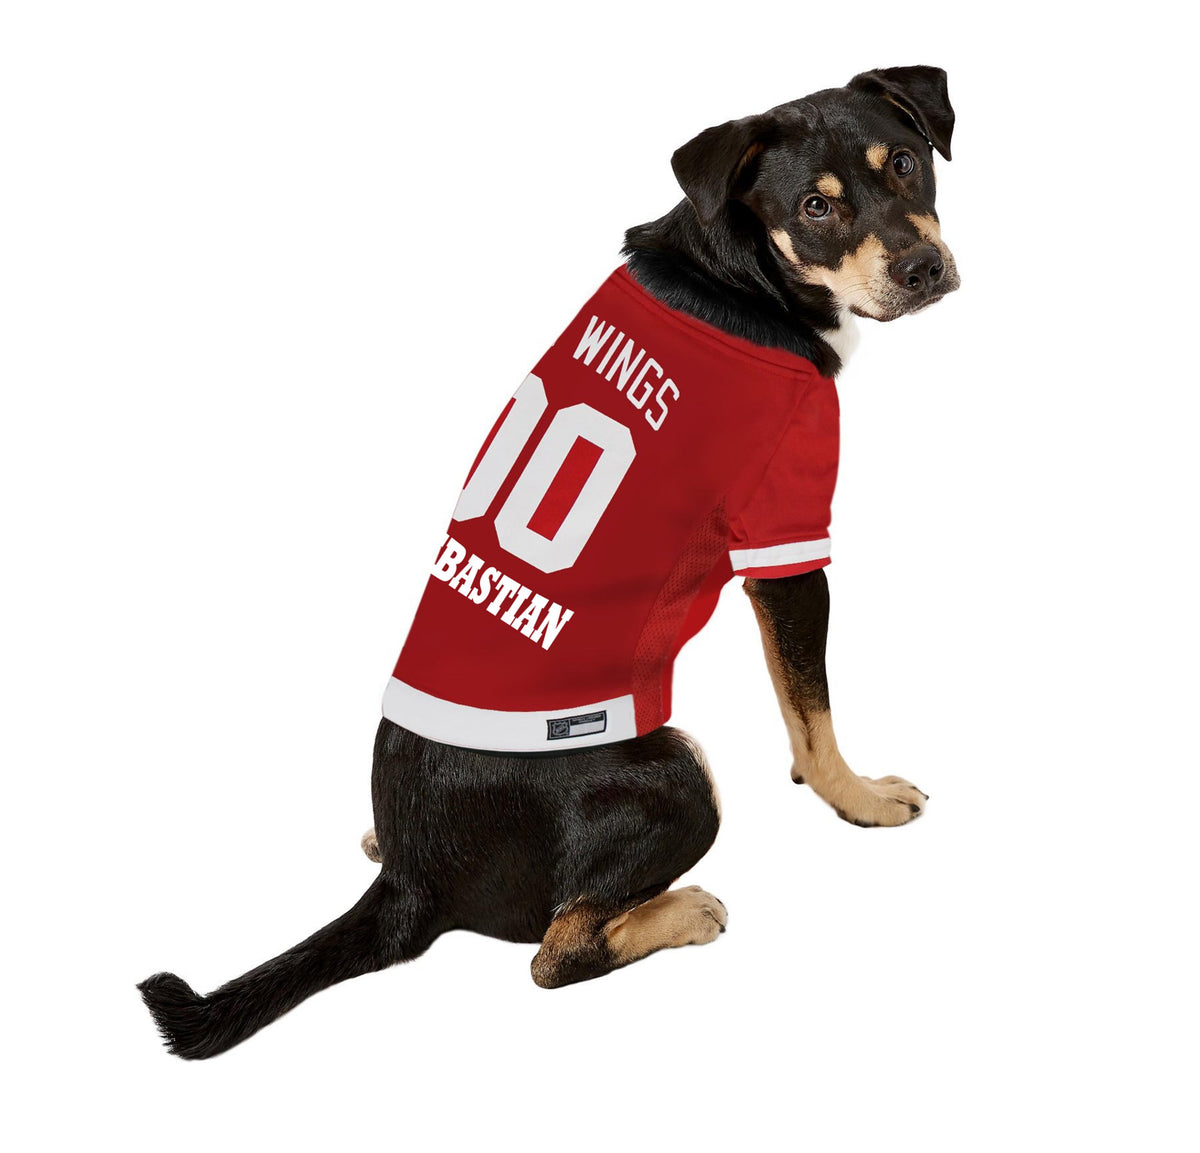 Detroit Red Wings Dog Collars, Leashes, ID Tags, Jerseys & More